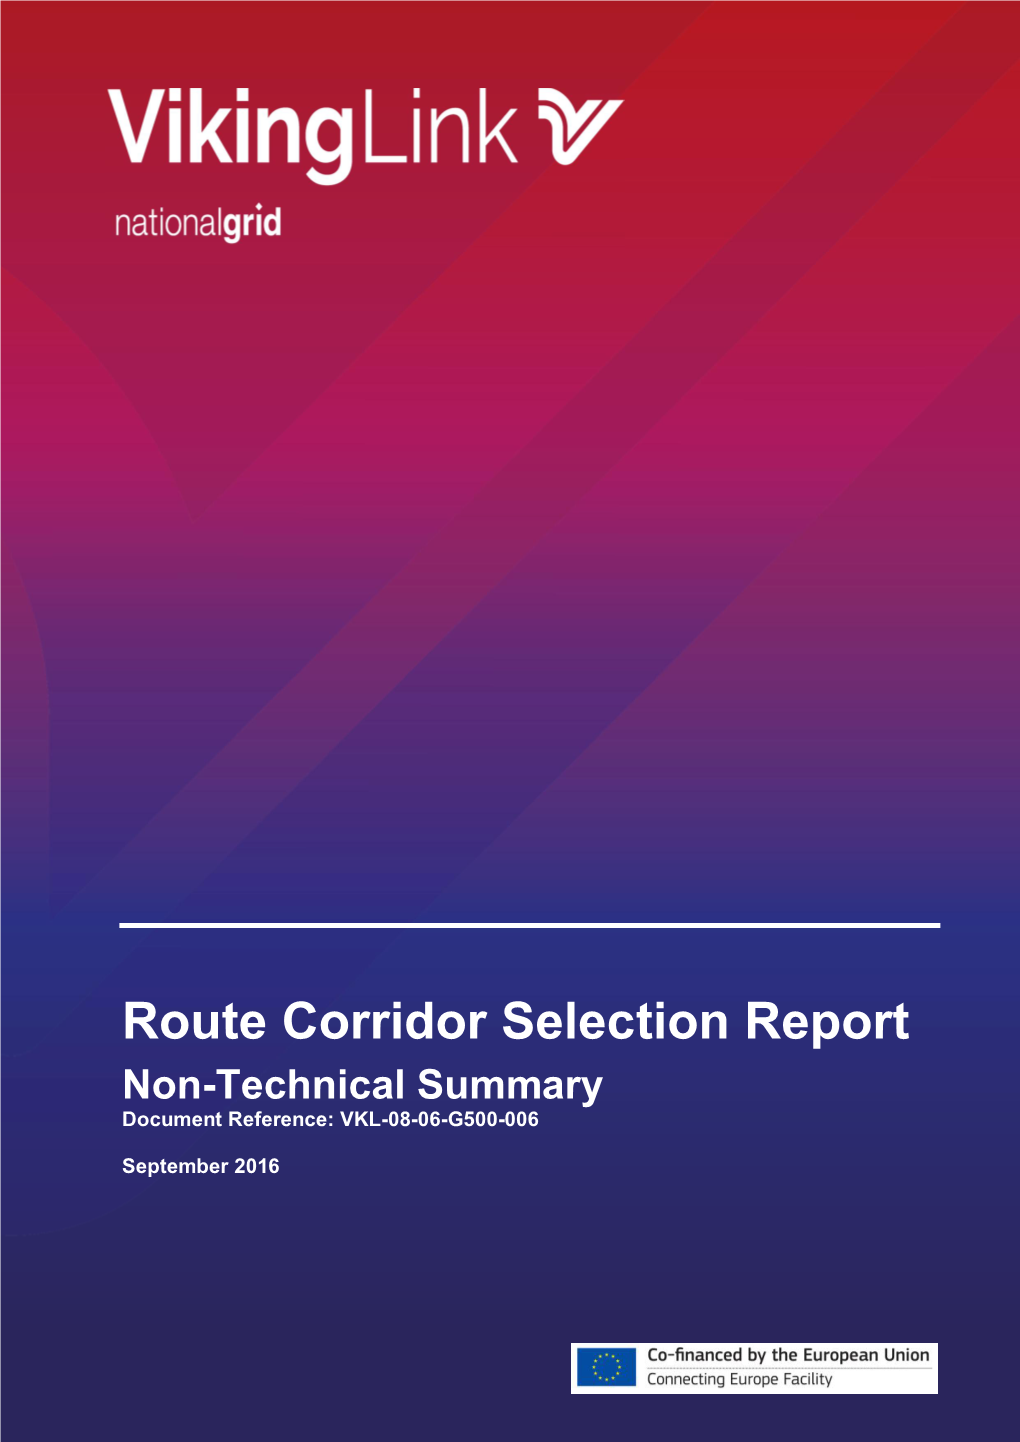 Route Corridor Selection Report Non-Technical Summary Document Reference: VKL-08-06-G500-006